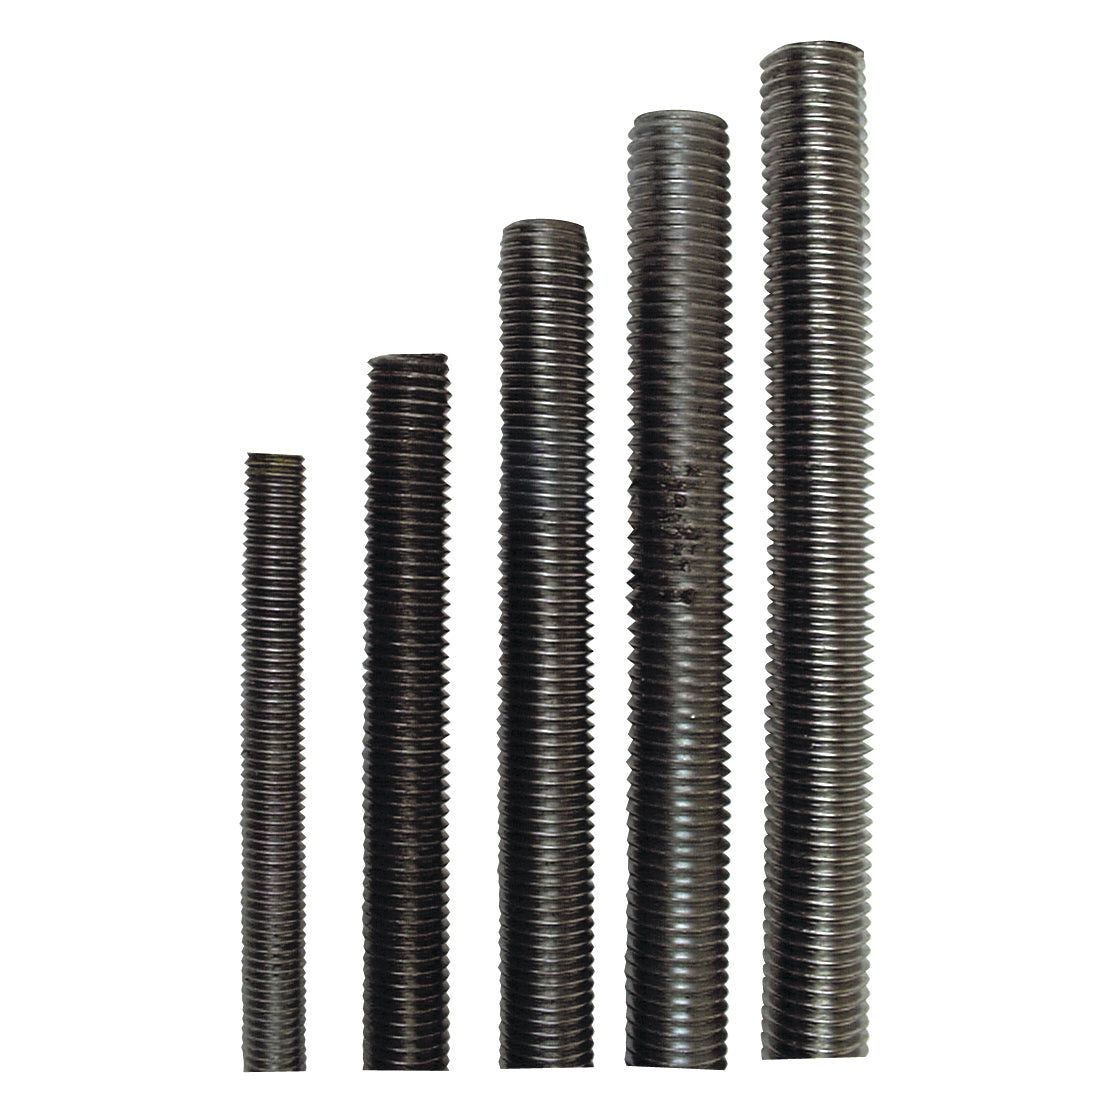 Metric Threaded Bar, Size:⌀16mm, Length: 1M, Tensile strength: 8.8.
 - S.8815 - Farming Parts